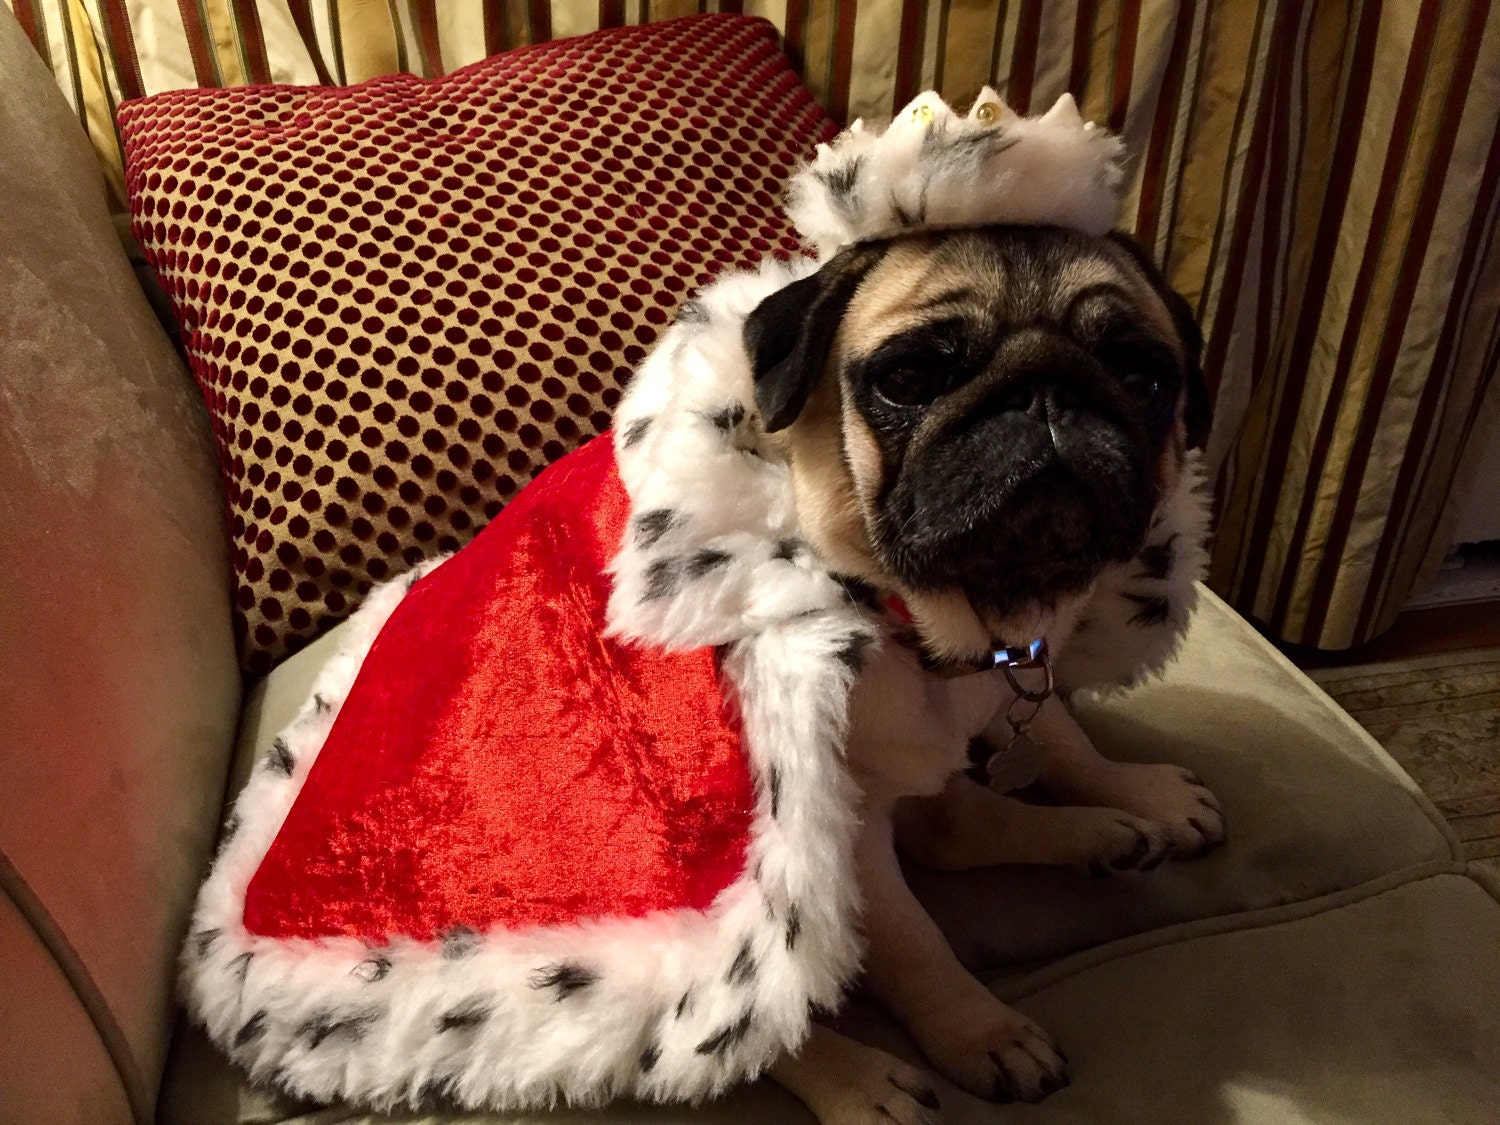 King of the Pugs.